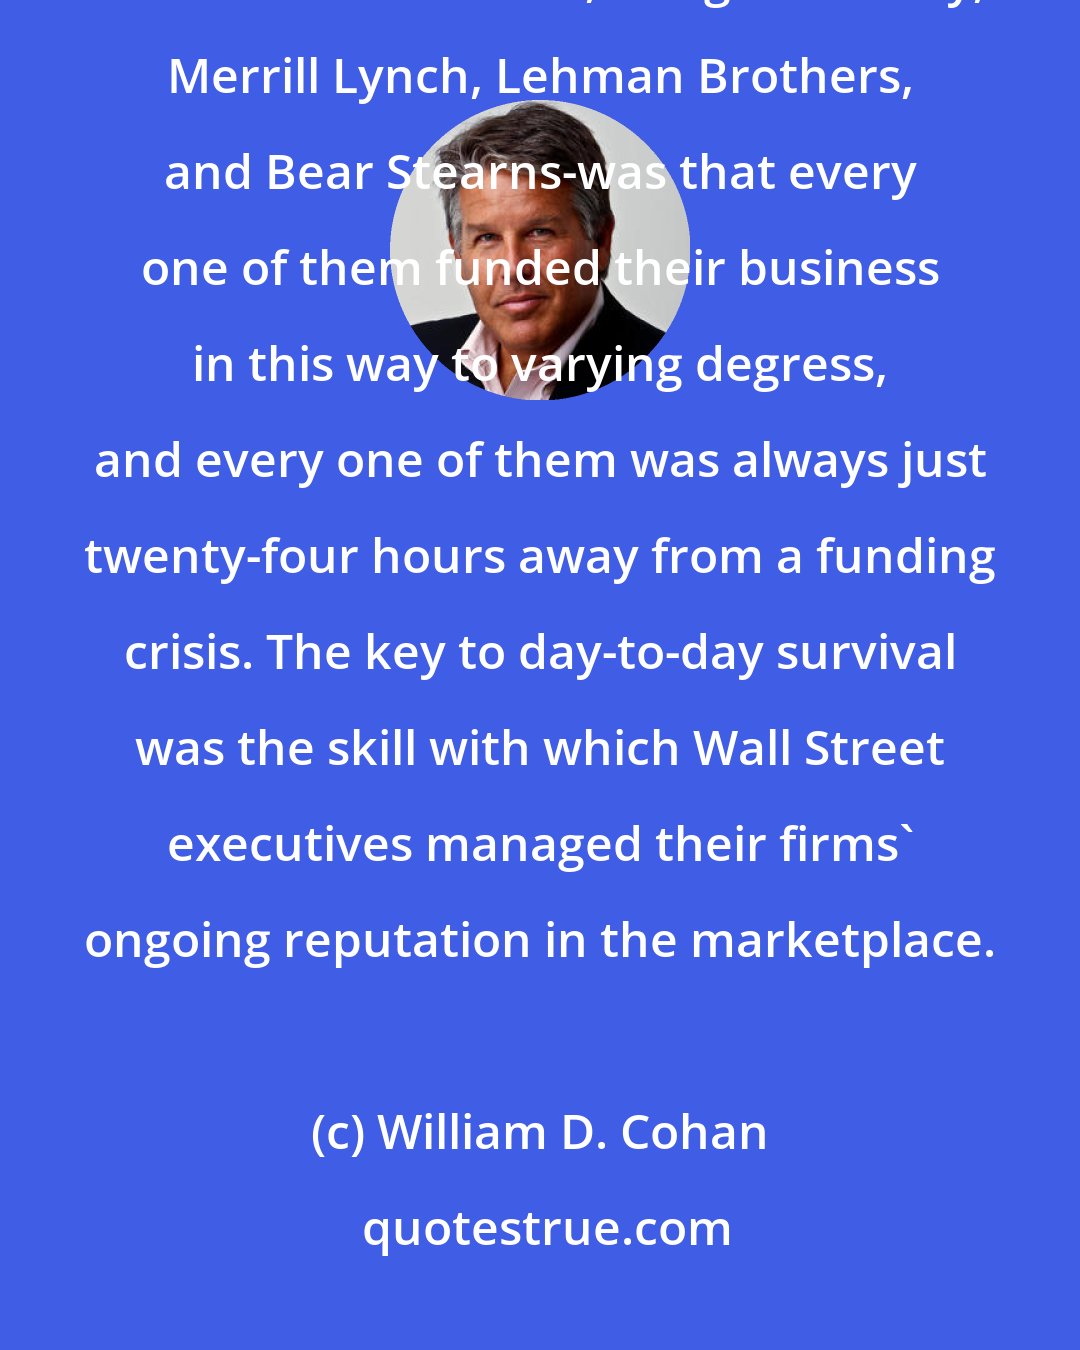 William D. Cohan: The dirty little secret of what used to be known as Wall Street securities firms-Goldman Sachs, Morgan Stanley, Merrill Lynch, Lehman Brothers, and Bear Stearns-was that every one of them funded their business in this way to varying degress, and every one of them was always just twenty-four hours away from a funding crisis. The key to day-to-day survival was the skill with which Wall Street executives managed their firms' ongoing reputation in the marketplace.